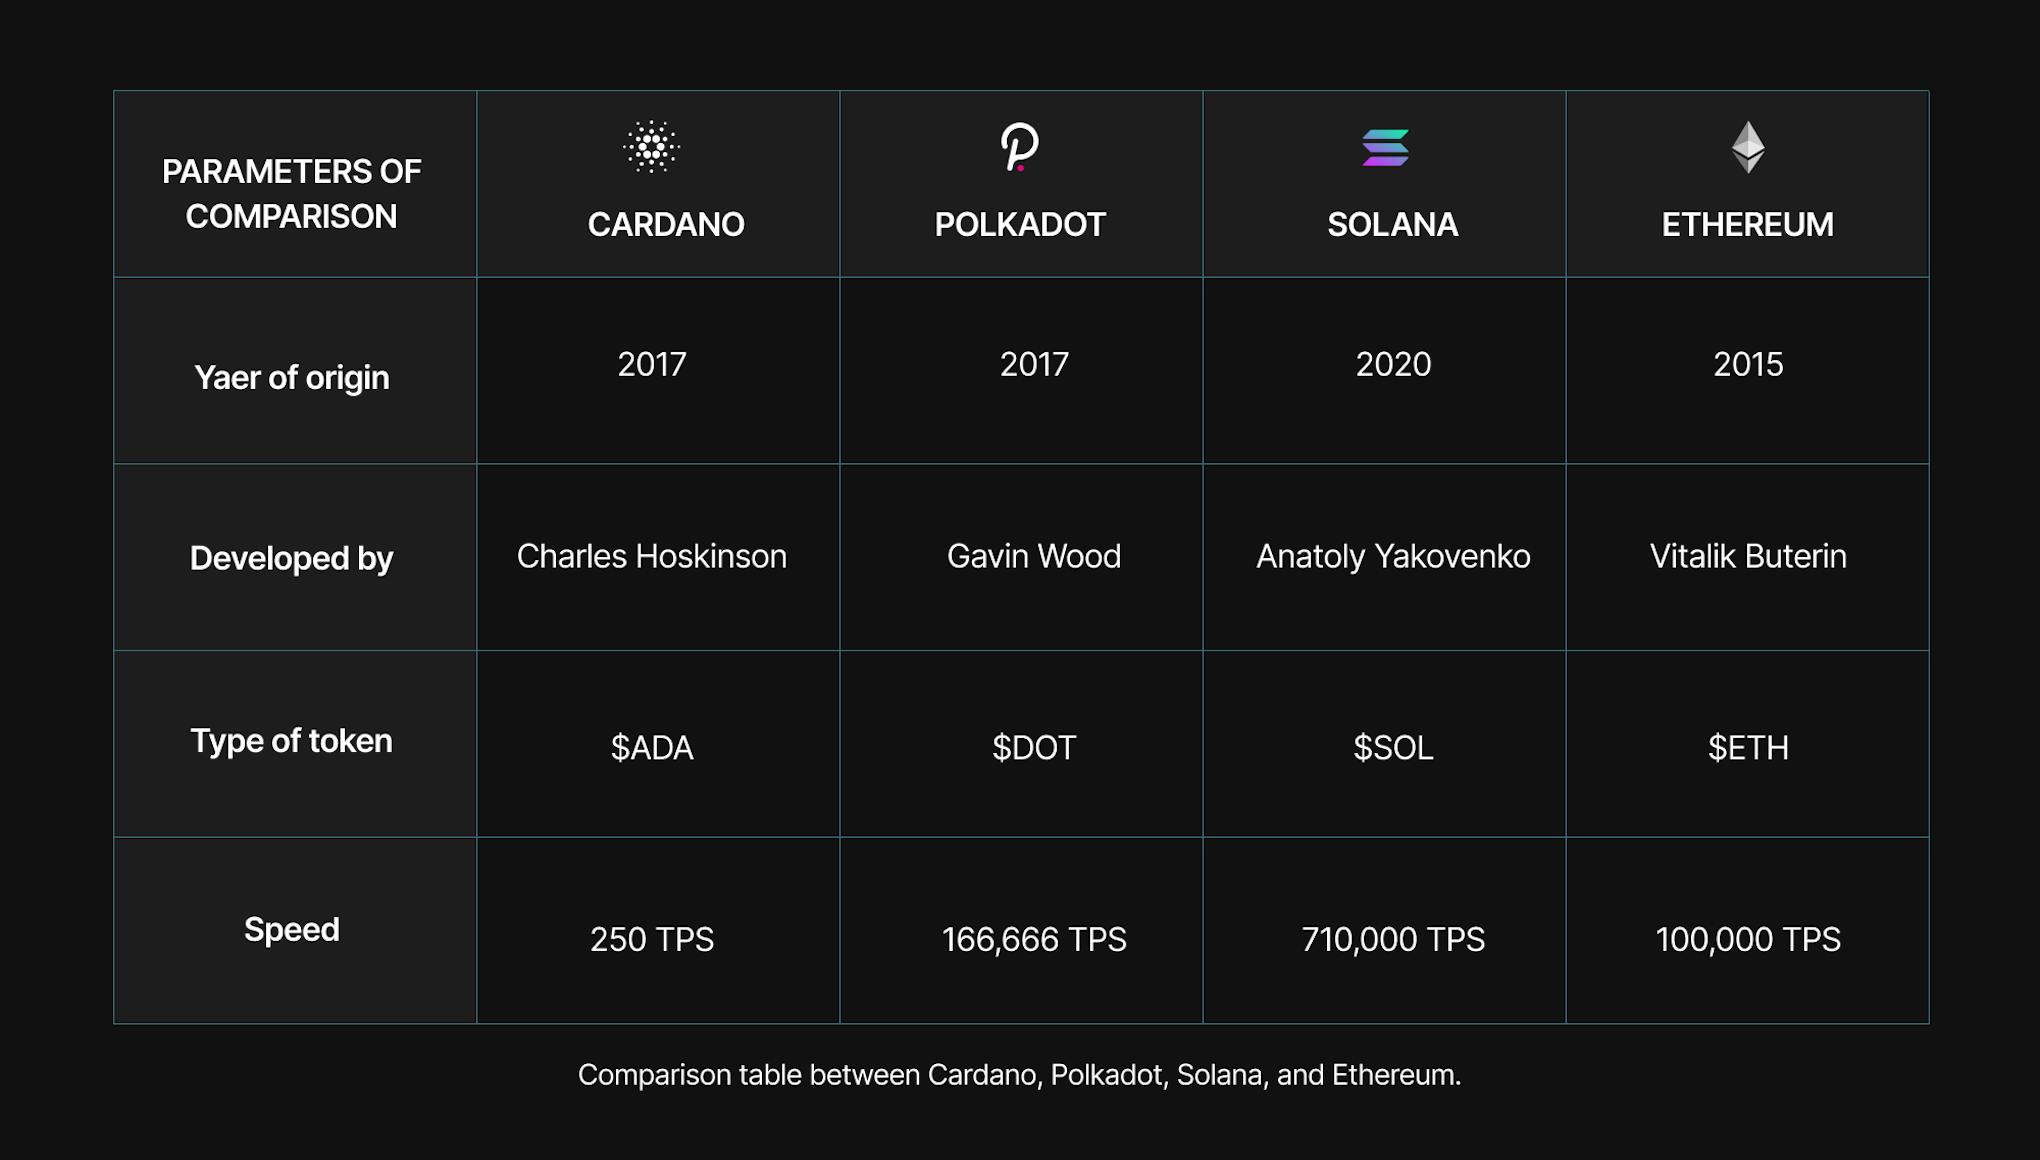 Comparison table between Cardano, Polkadot, Solana, and Ethereum.